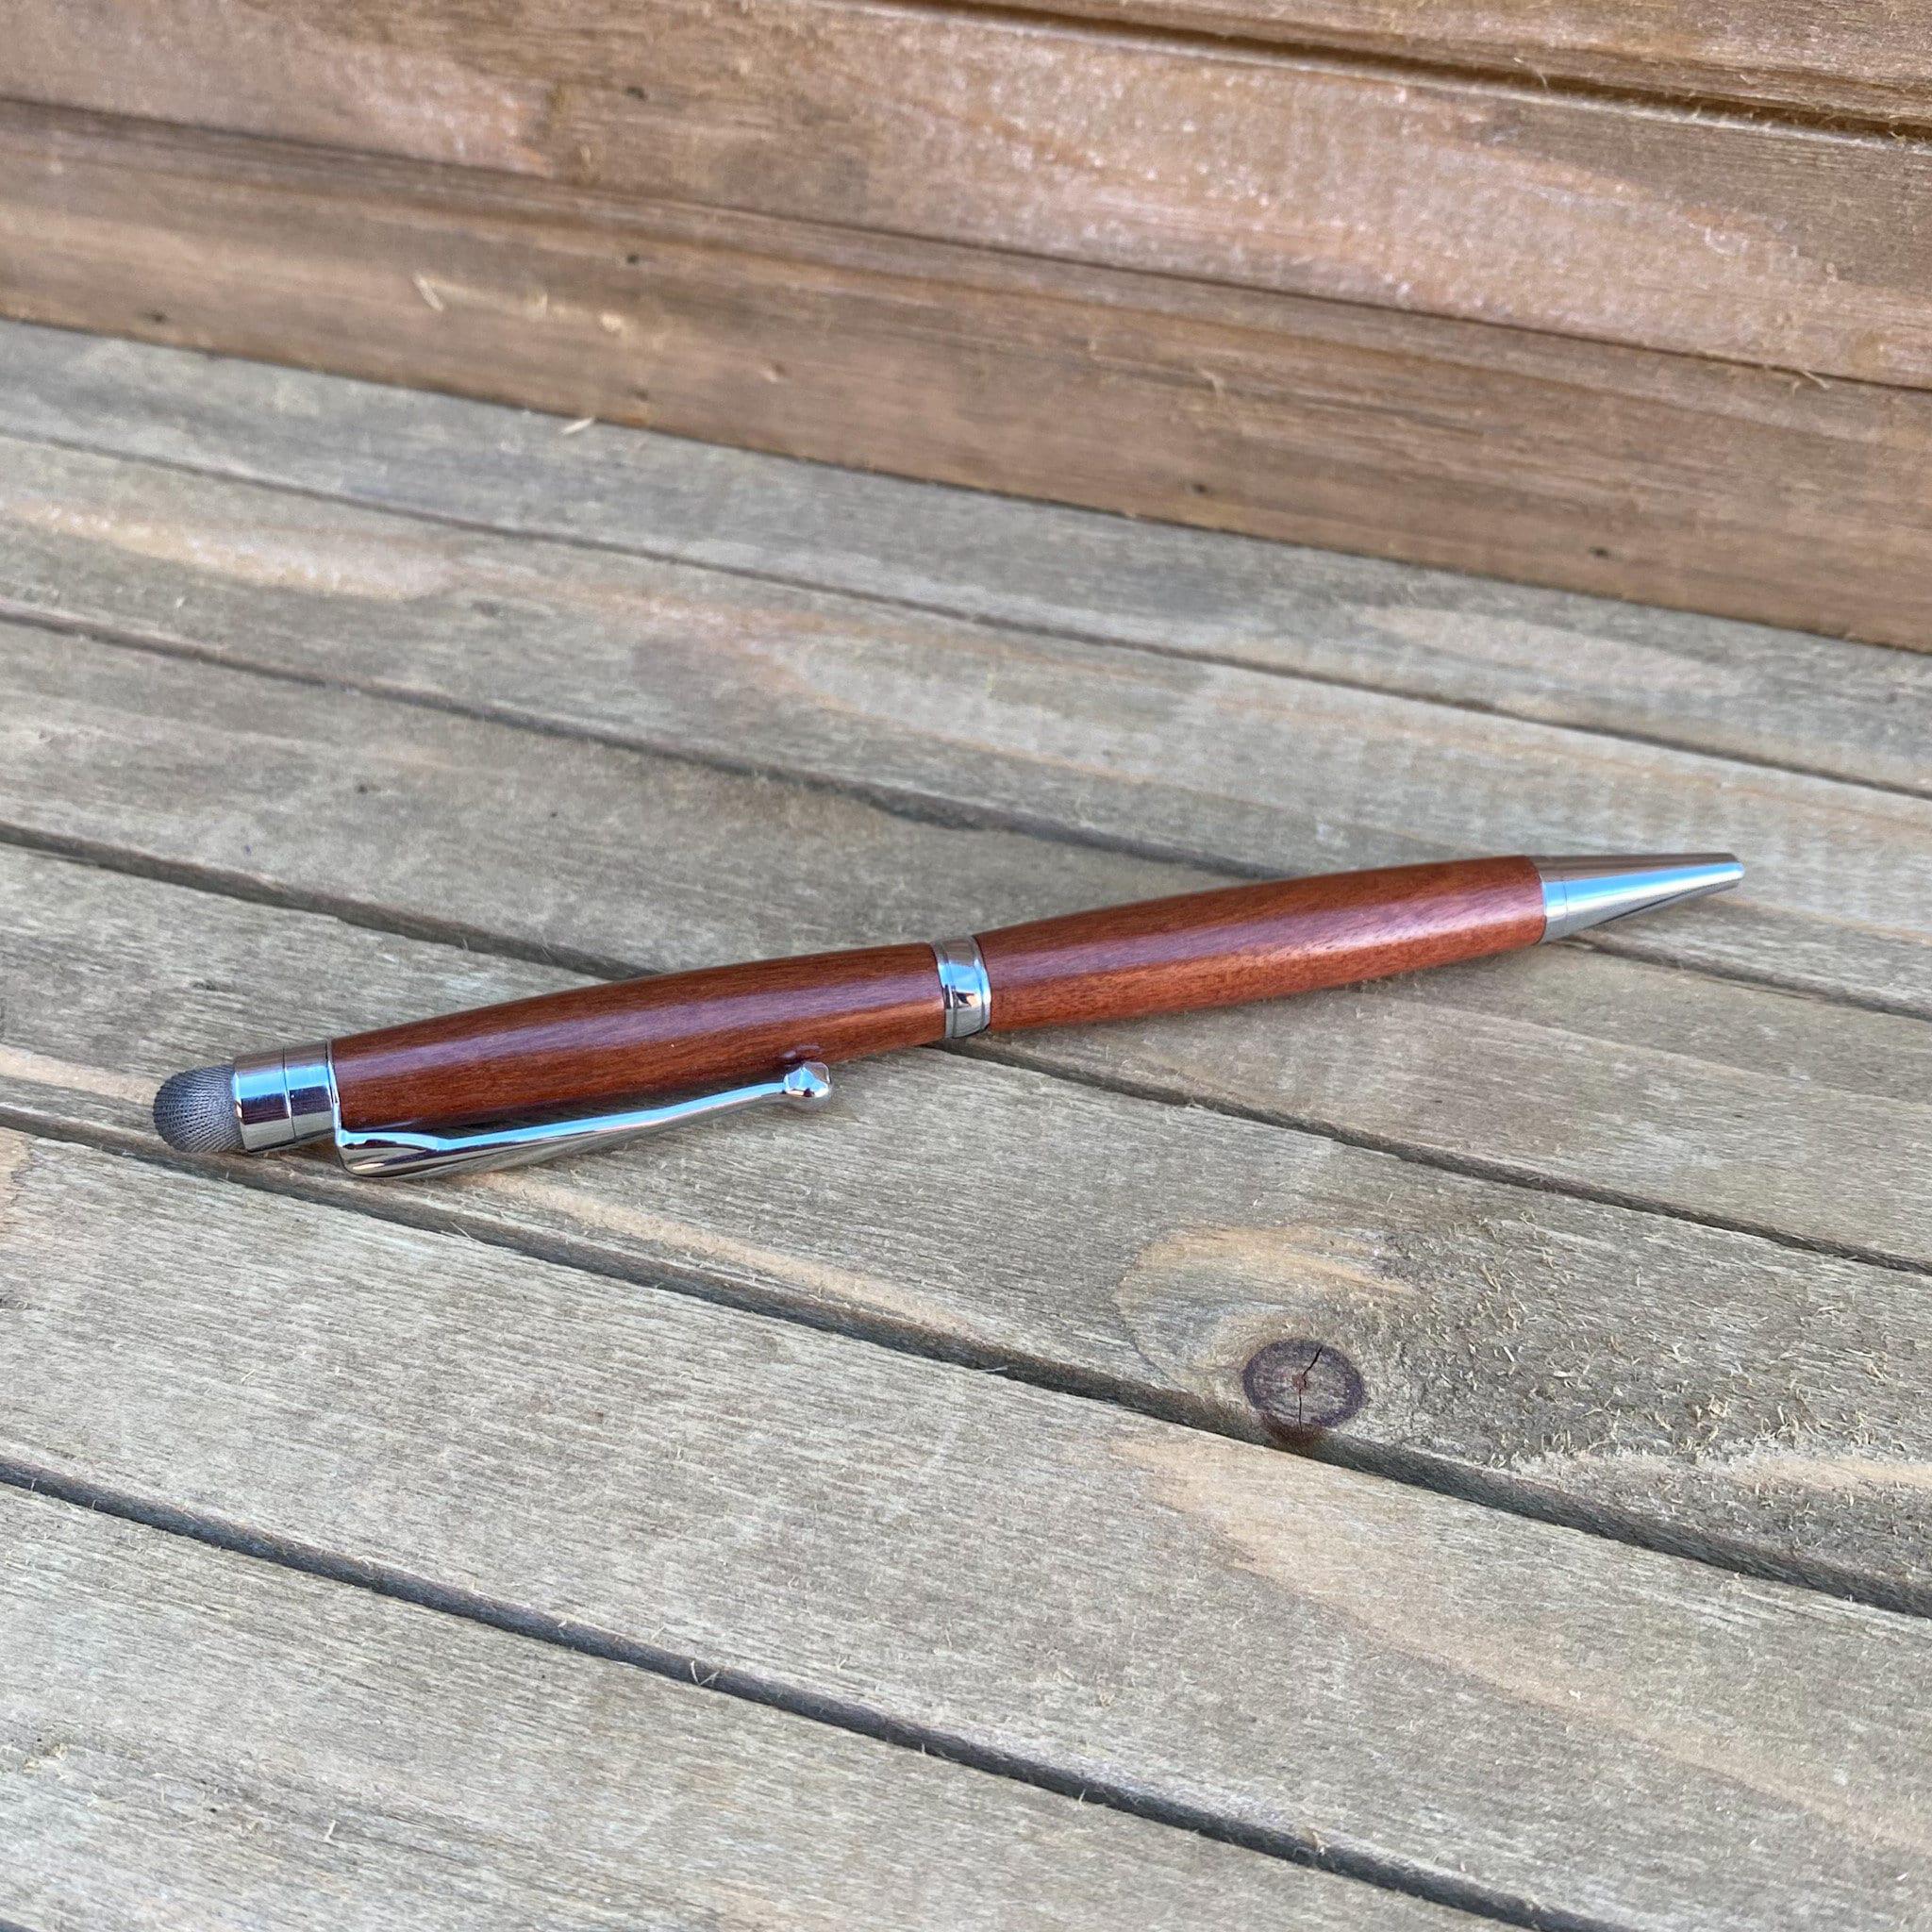 Padauk Pen With 24kt Gold Fittings - Handcrafted Wood Ink Pen By